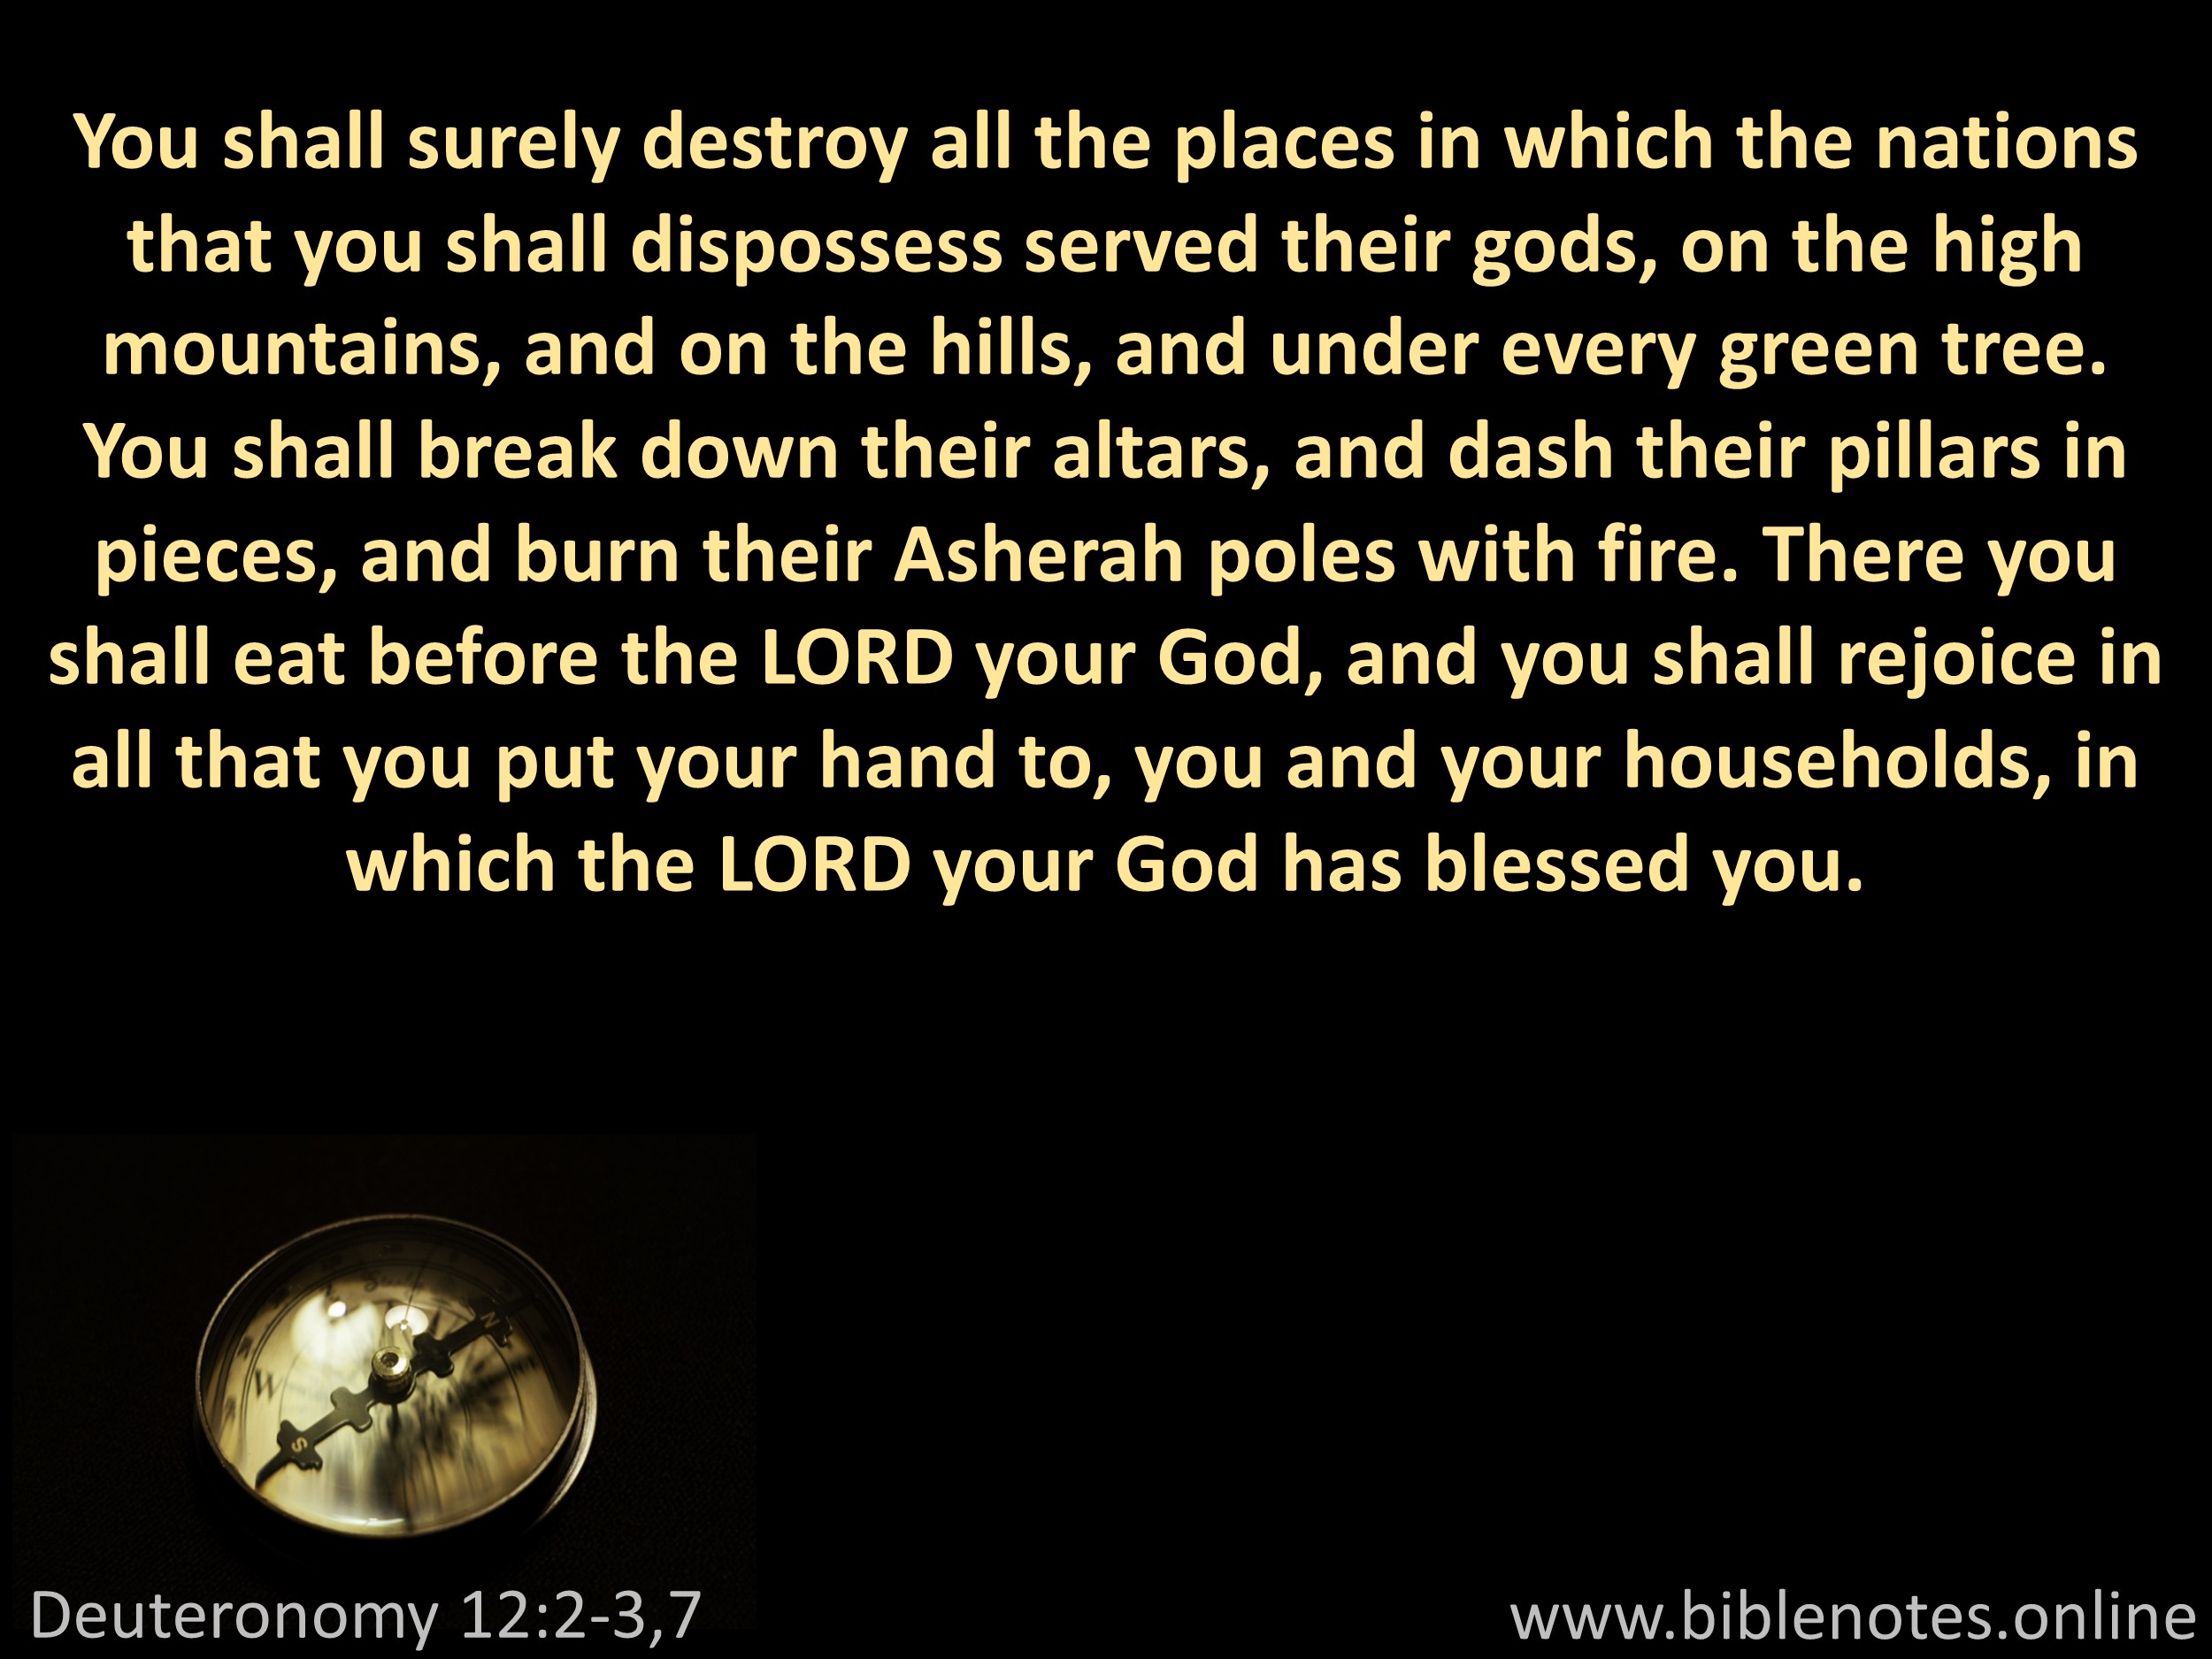 Bible Verse from Deuteronomy Chapter 12